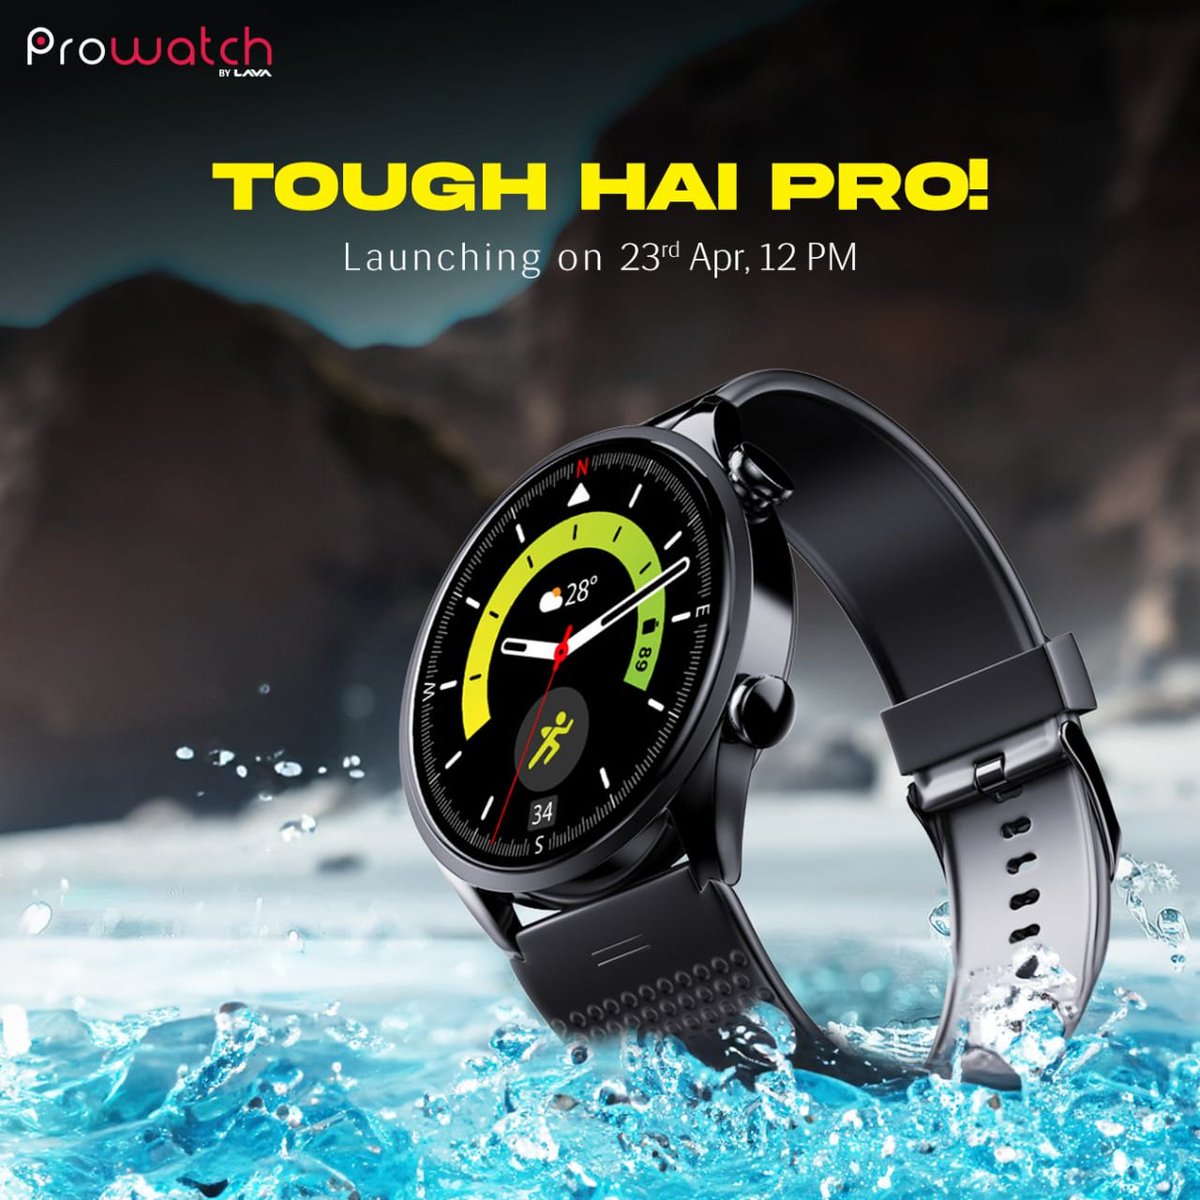 Tomorrow is the big day! Be prepared to explore the innovative features of Prowatch, including Gorilla Glass 3 protection and advanced sensors. Stay tuned for the launch on April 23rd
#ProwatchLaunchTomorrow